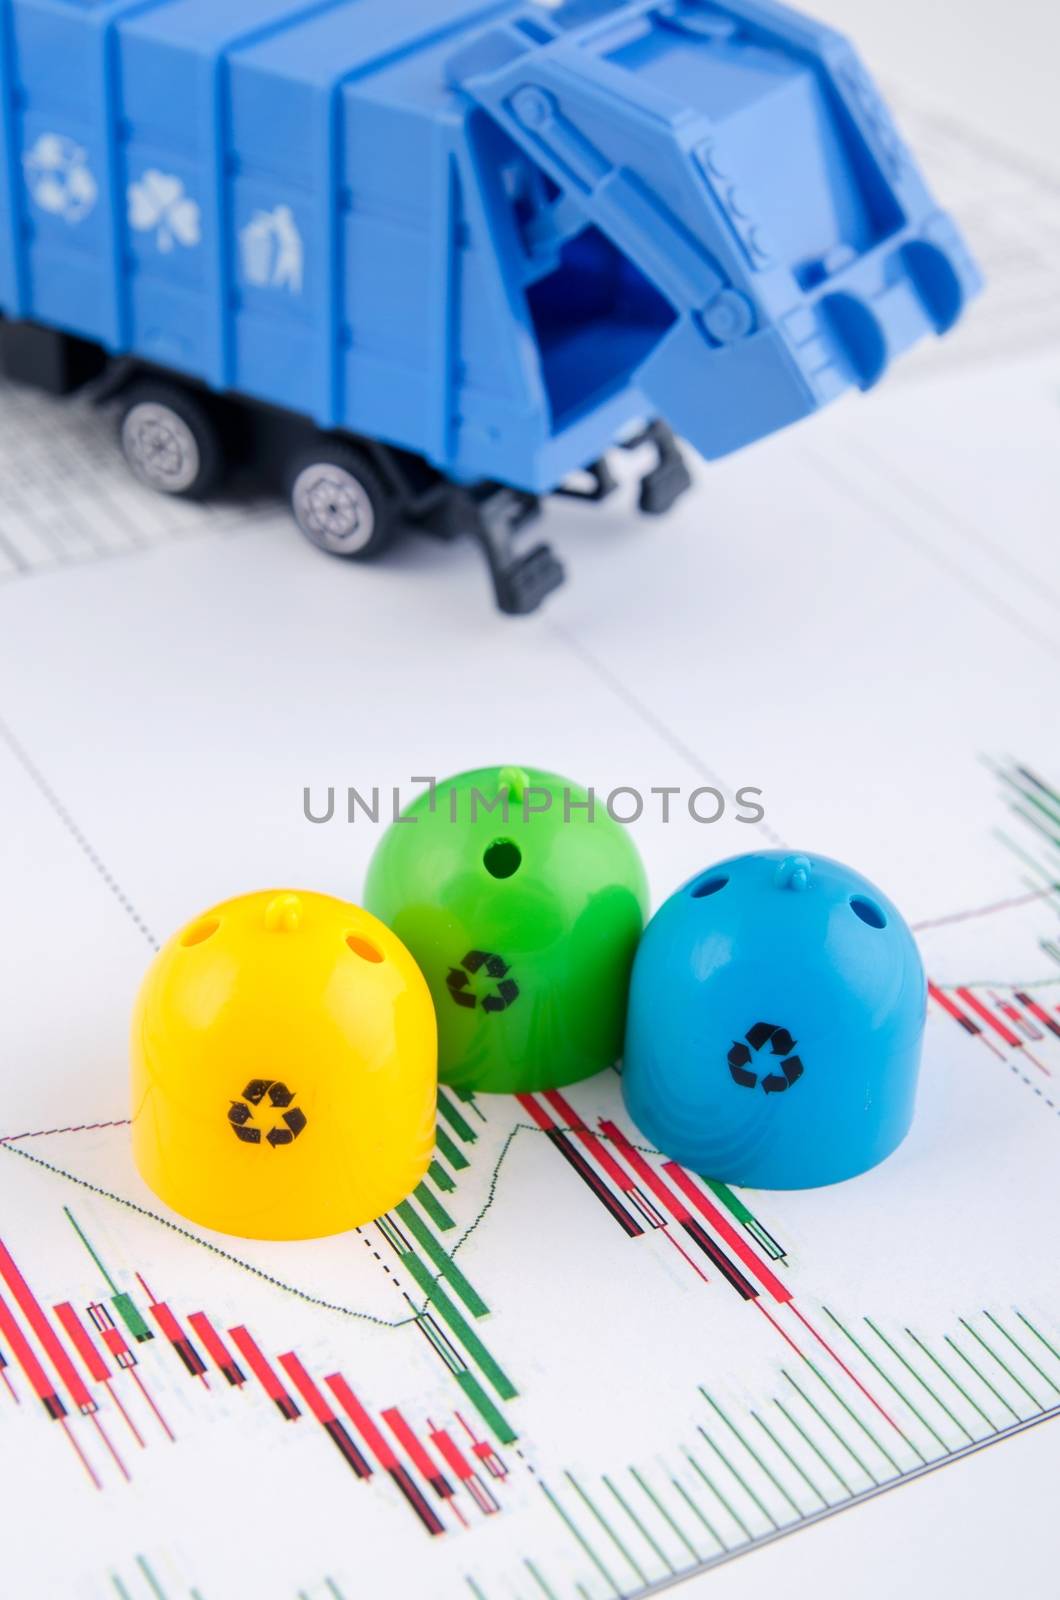 Colored trash bins and garbage truck toys on business background